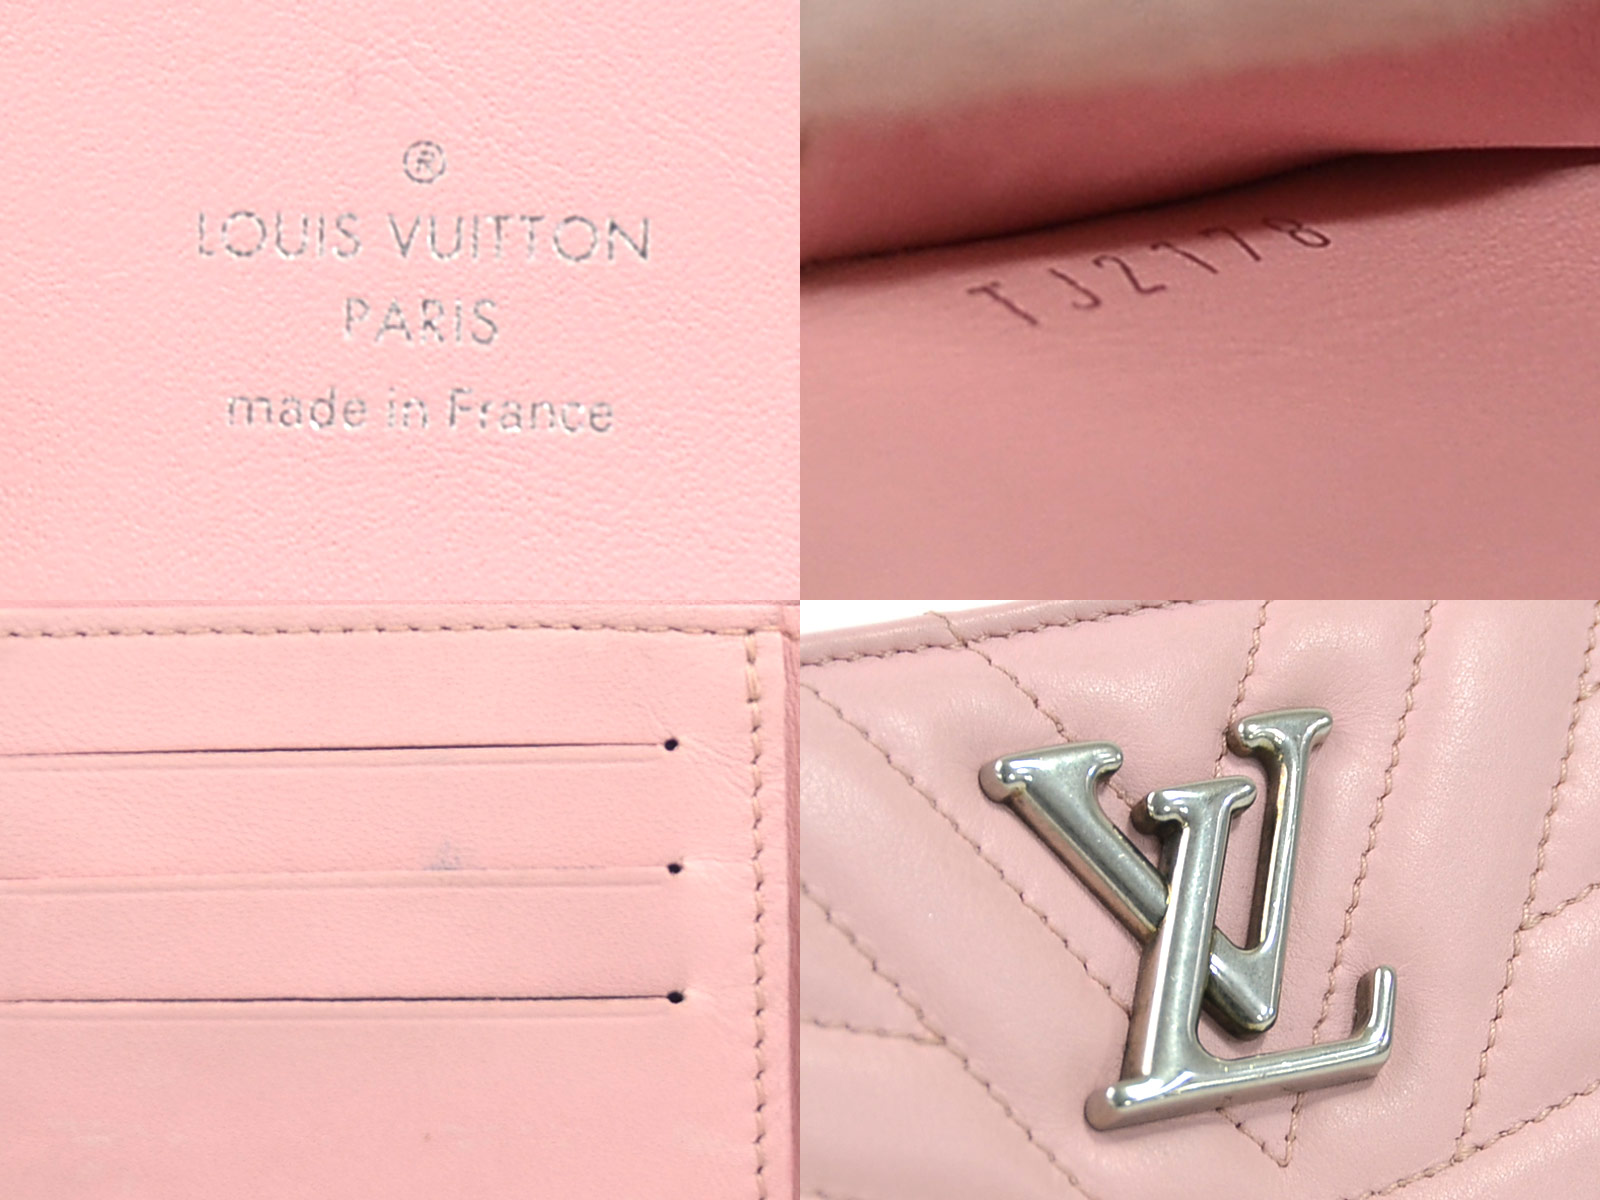 Auth Louis Vuitton New Wave Zipped Compact Wallet Pink/Silver M63791 - 97915c | eBay